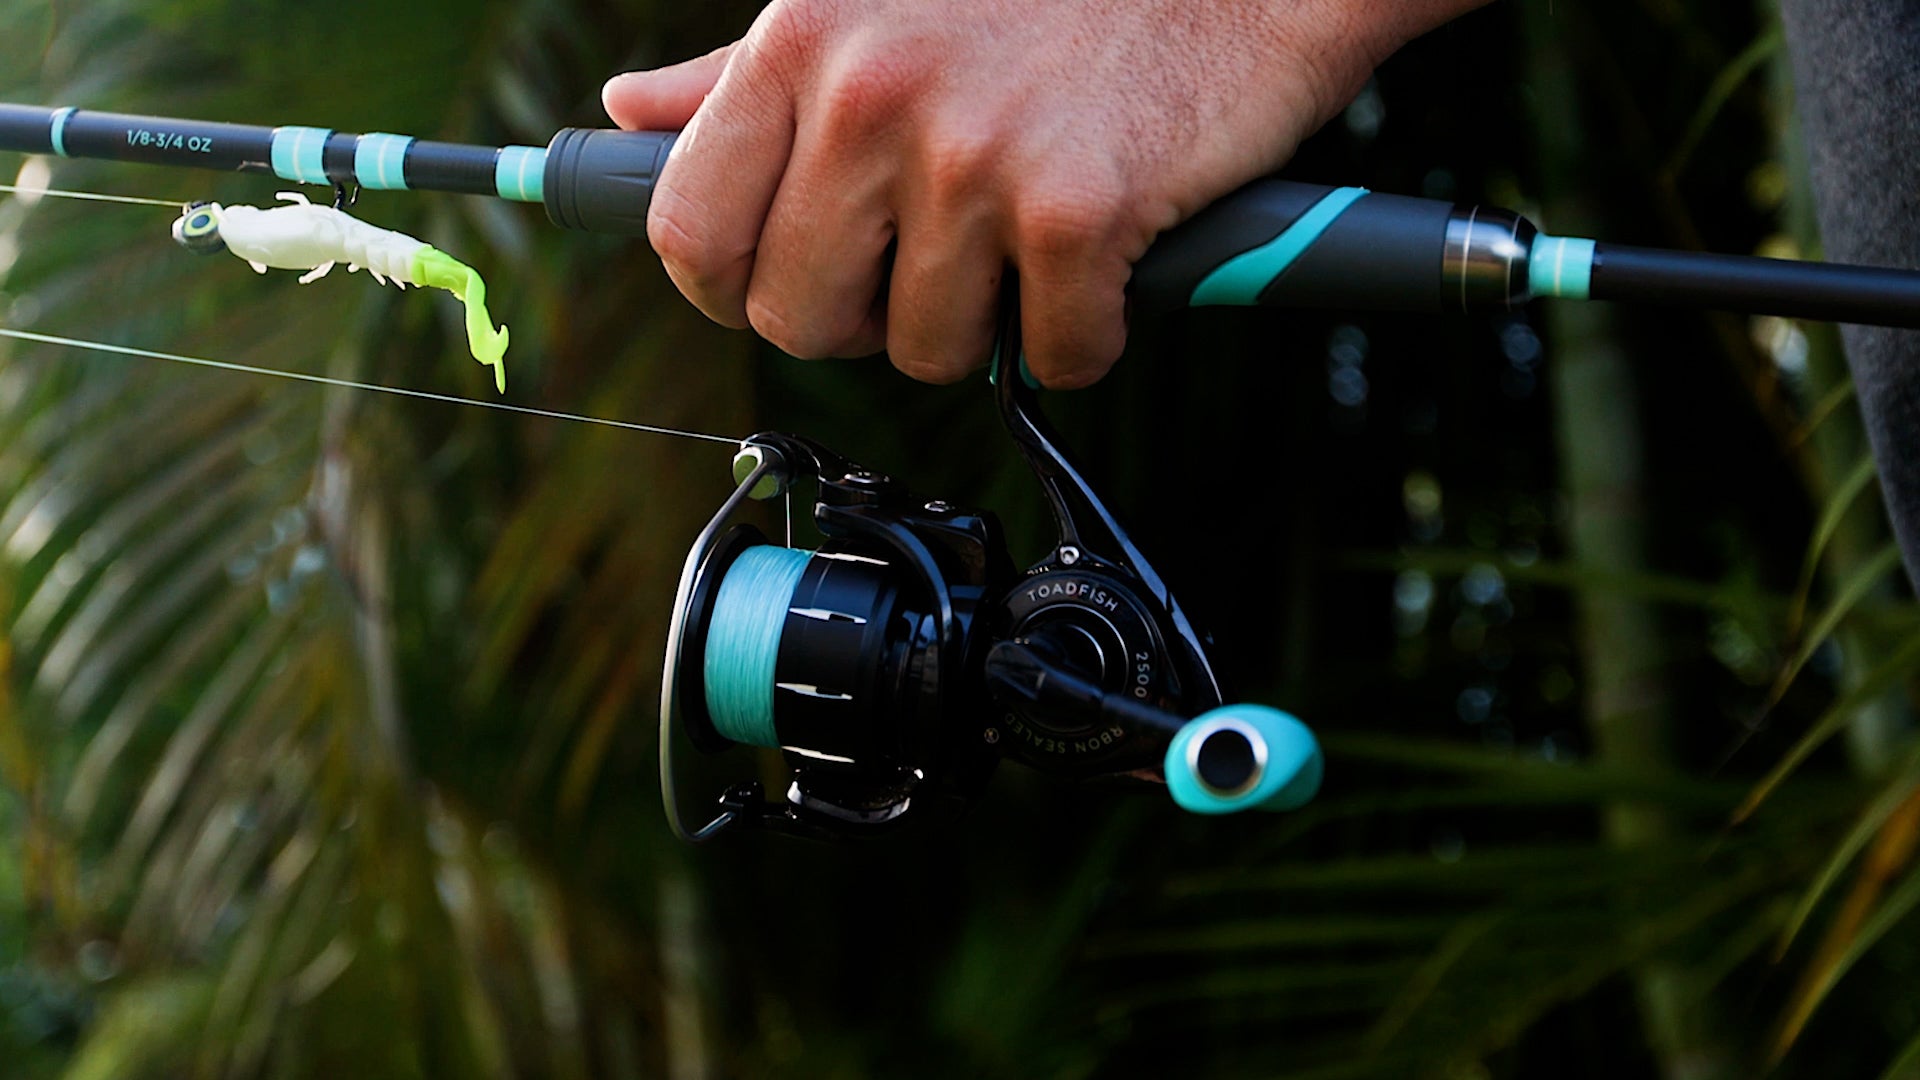 The 5 Best Soft Plastics for Inshore Saltwater Fishing